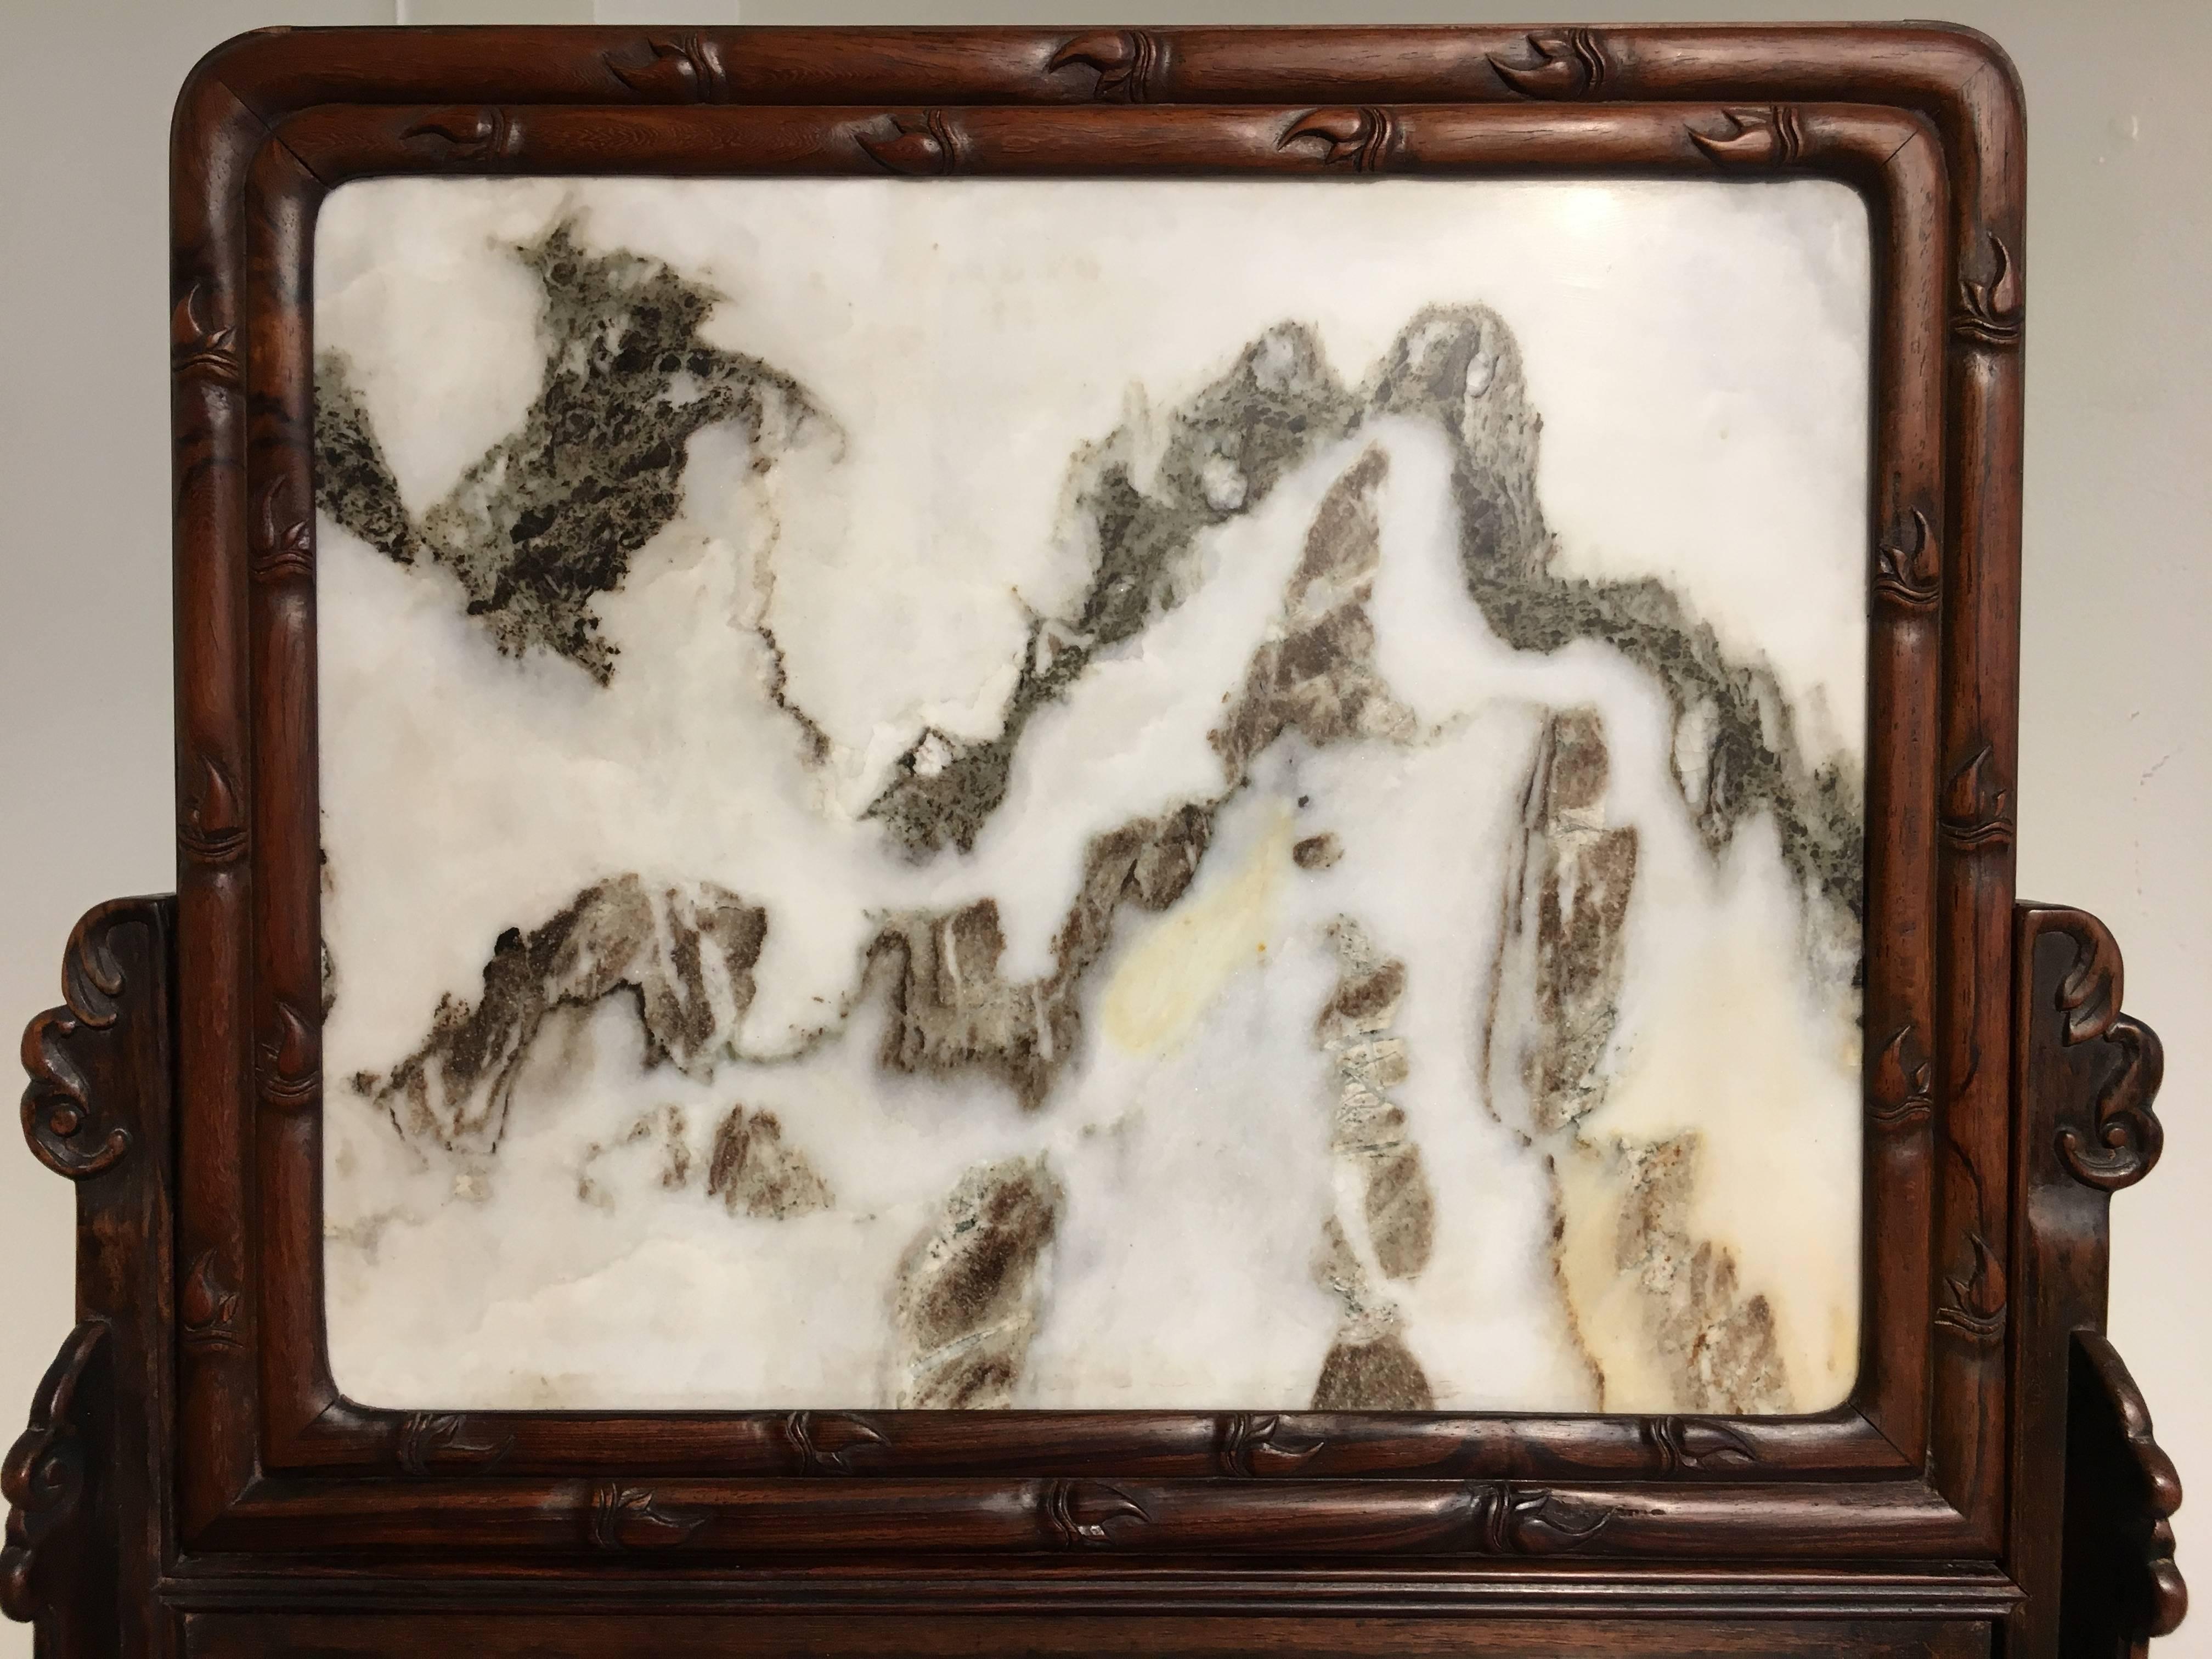 An attractive Chinese Republic period carved hardwood and Dali marble table screen. The well patterned Dali marble dream stone evocative of a misty mountain landscape and set in a hardwood frame carved to imitate bamboo.
The screen set in a